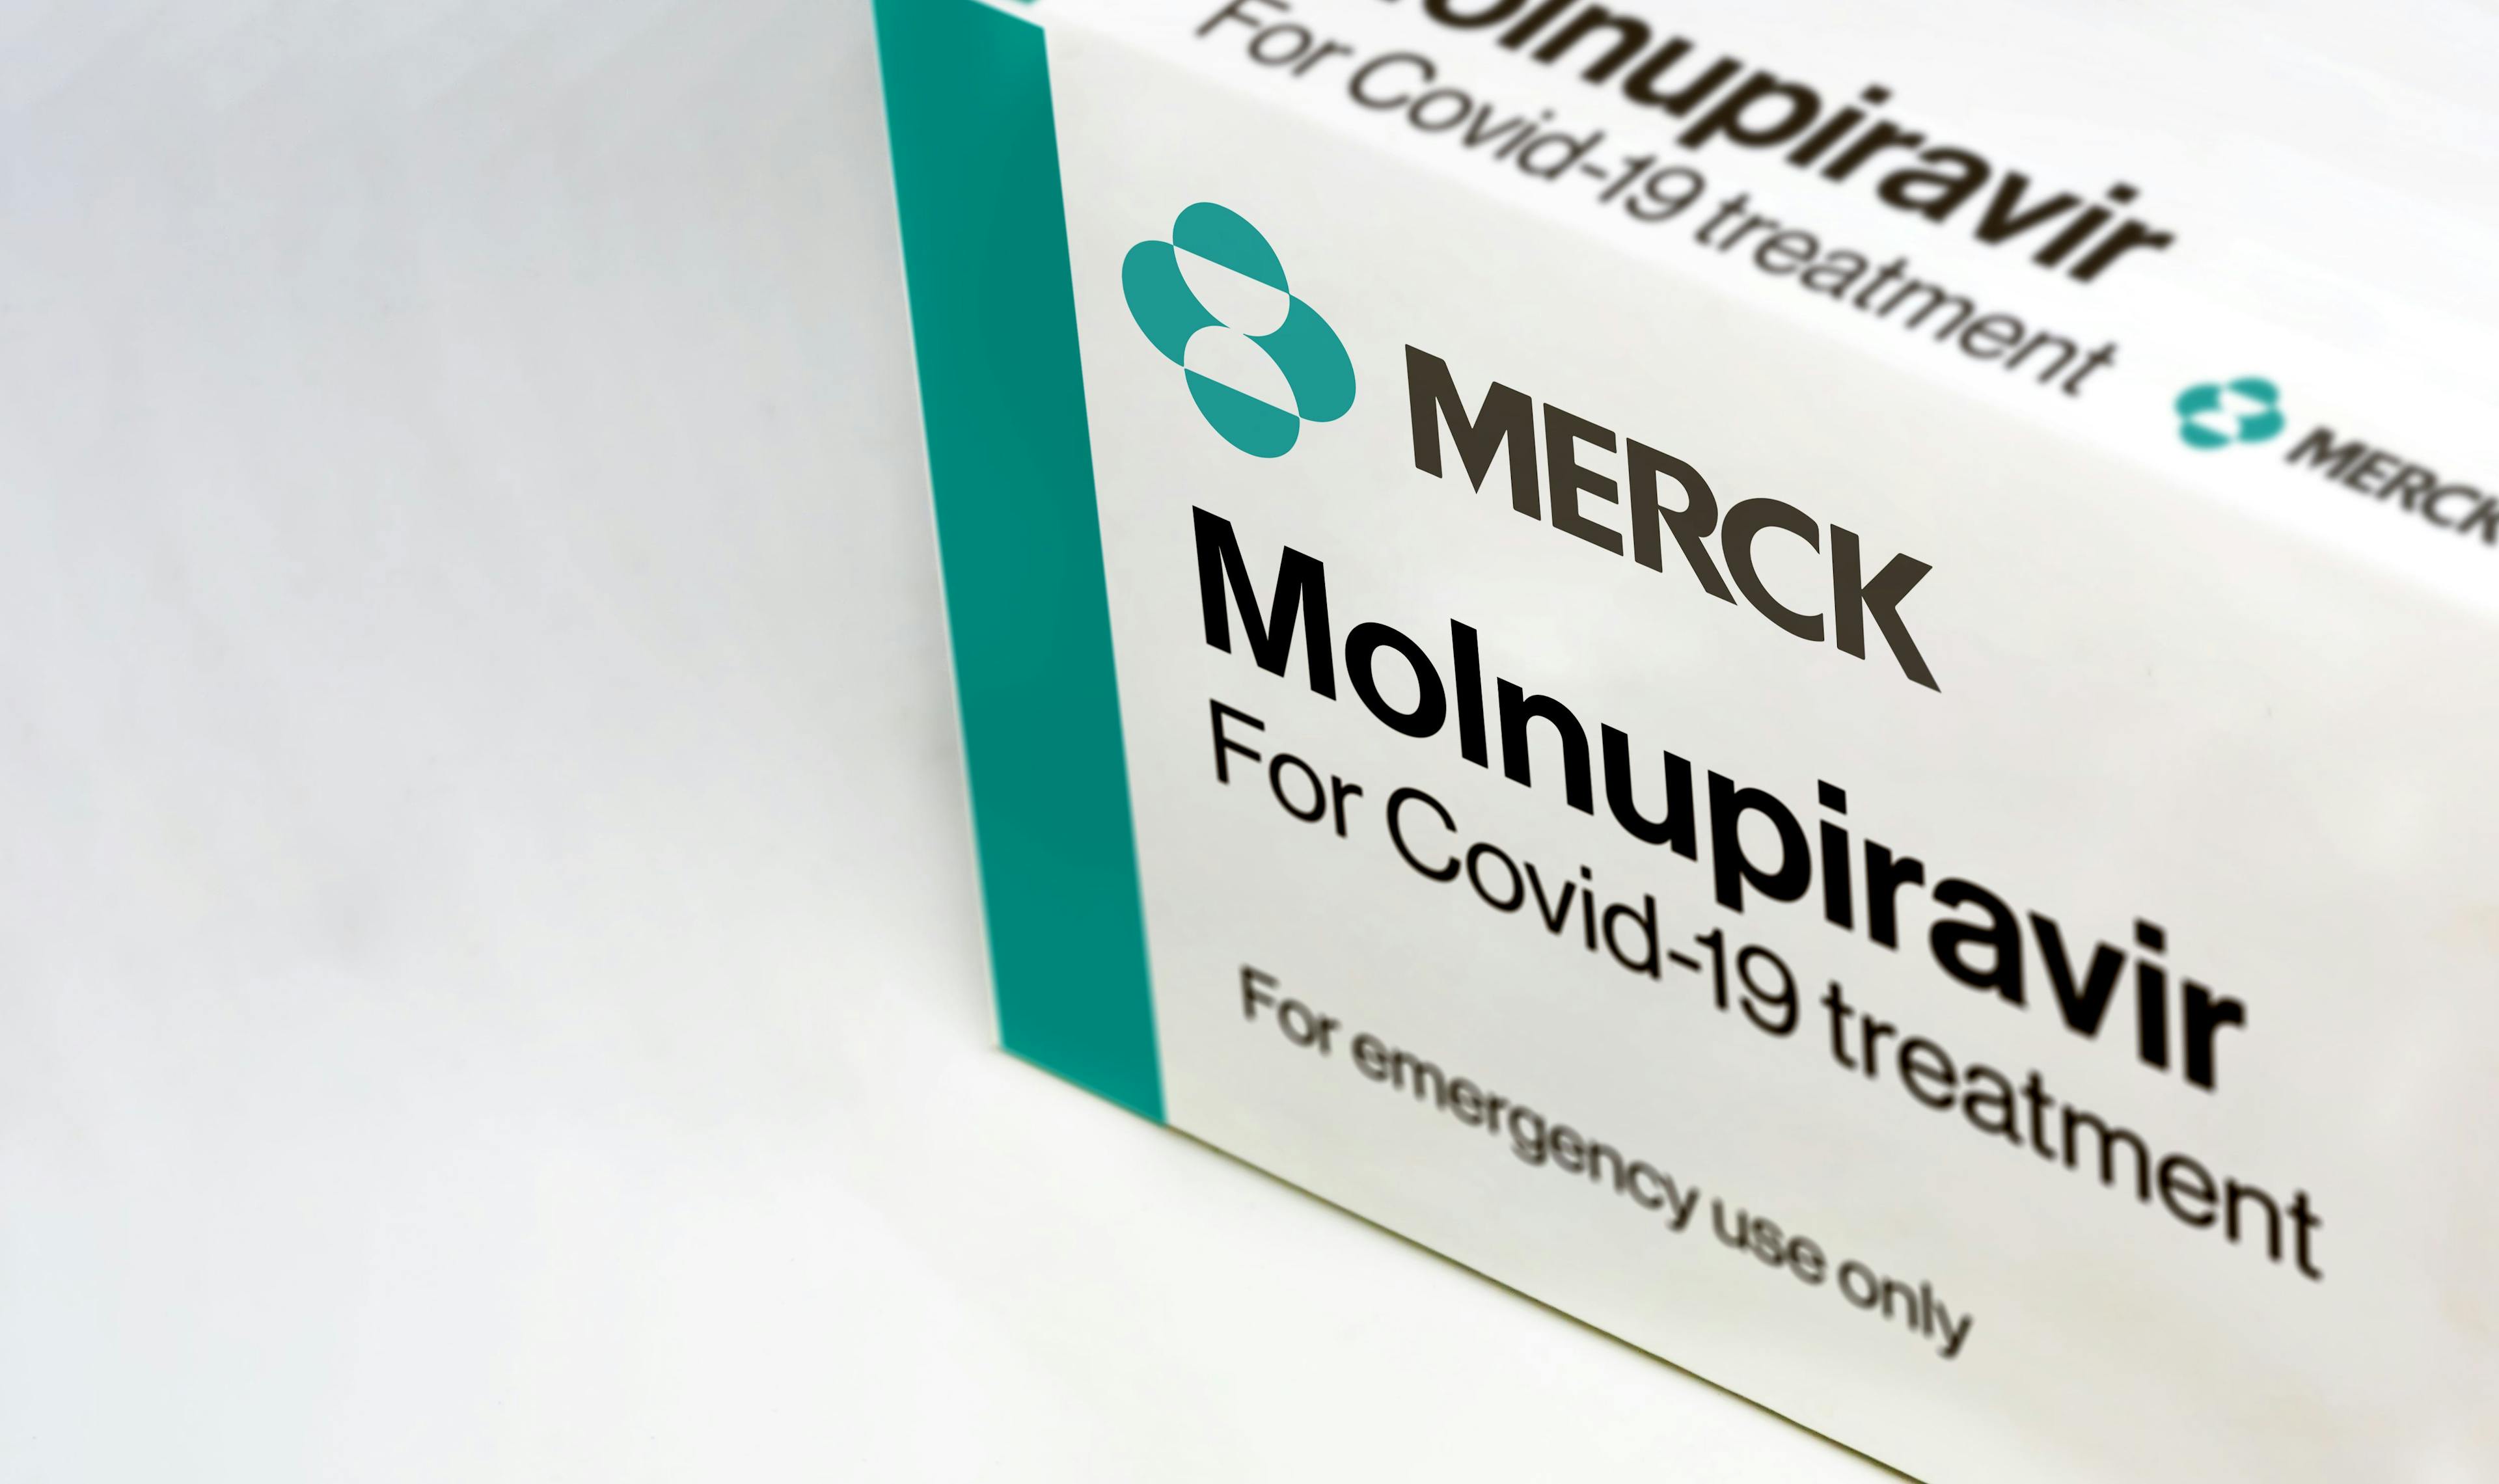 Despite failing to meet primary trial endpoints, molnupiravir reduced the length of COVID-19 infection by 4.2 days in vaccinated patients.